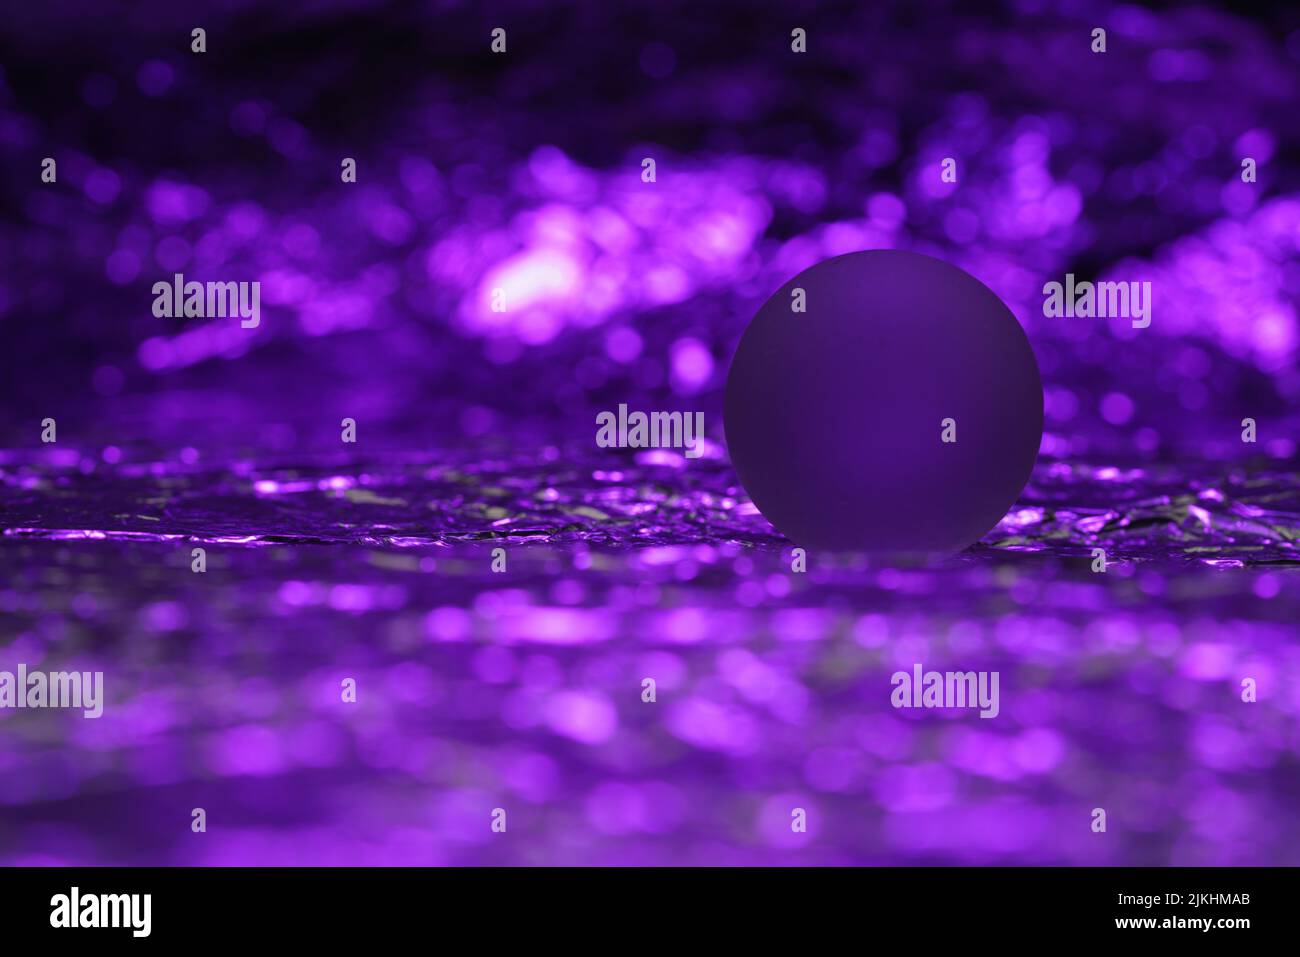 A small ball for Christmas decorations on a shiny, purple background Stock Photo